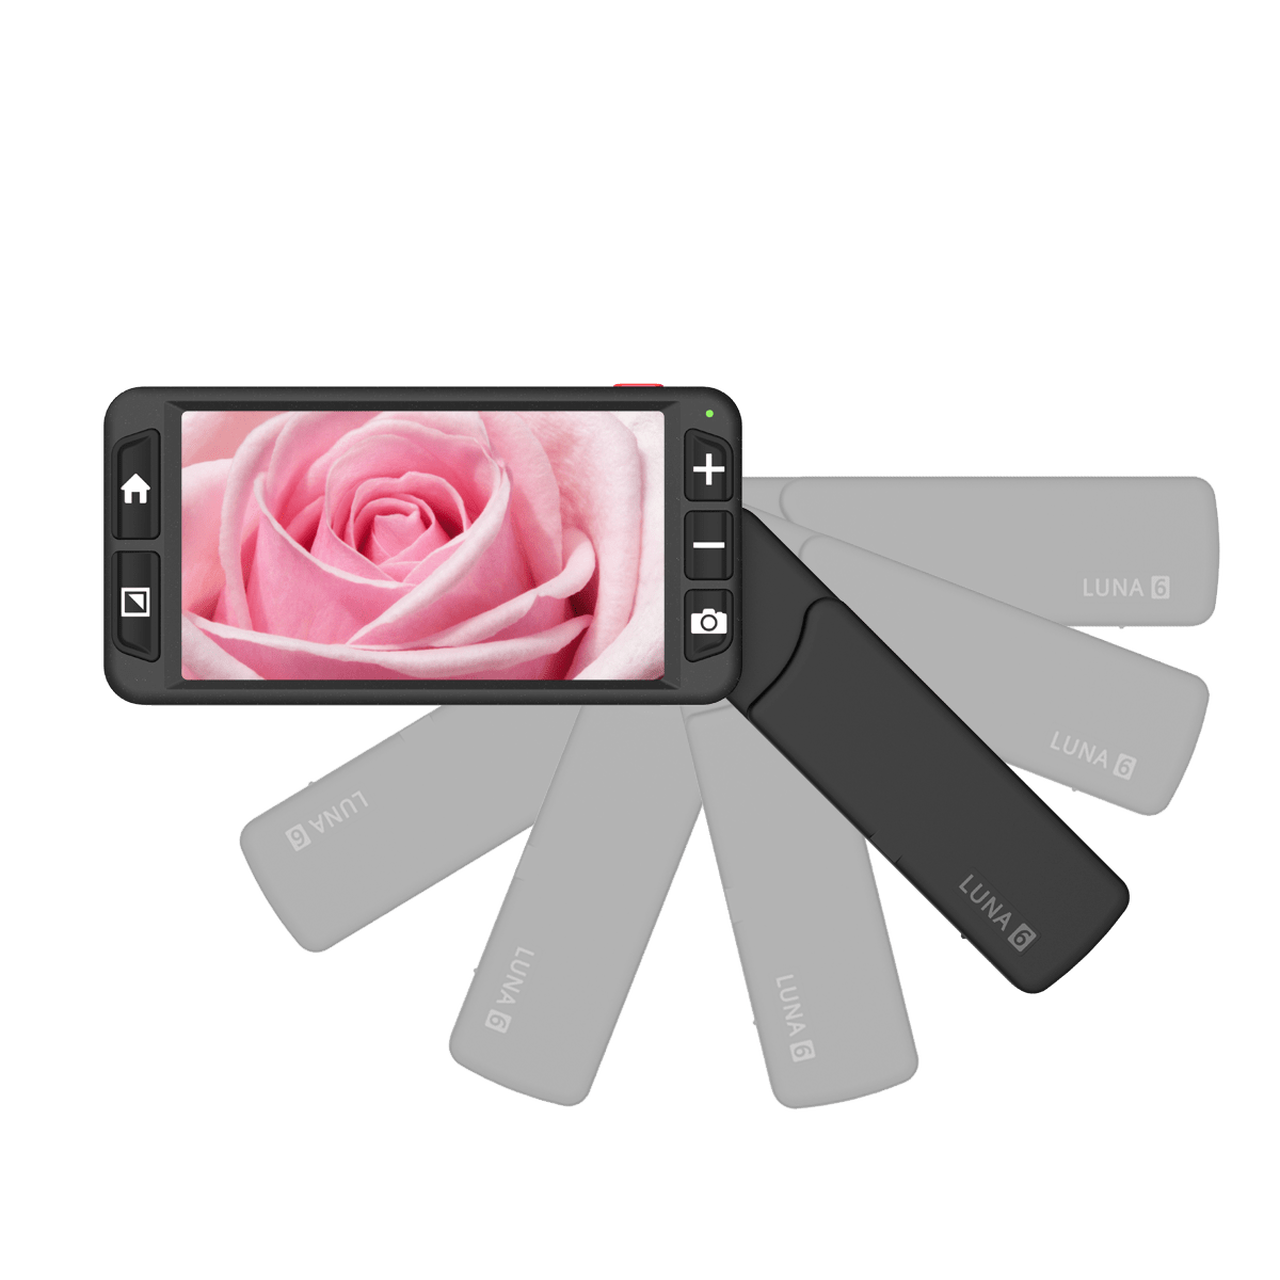 Luna 6 stock image with a pink rose on the screen, the handle is pulled out and there are ghost images of the handle to show how the handle moves when being opened